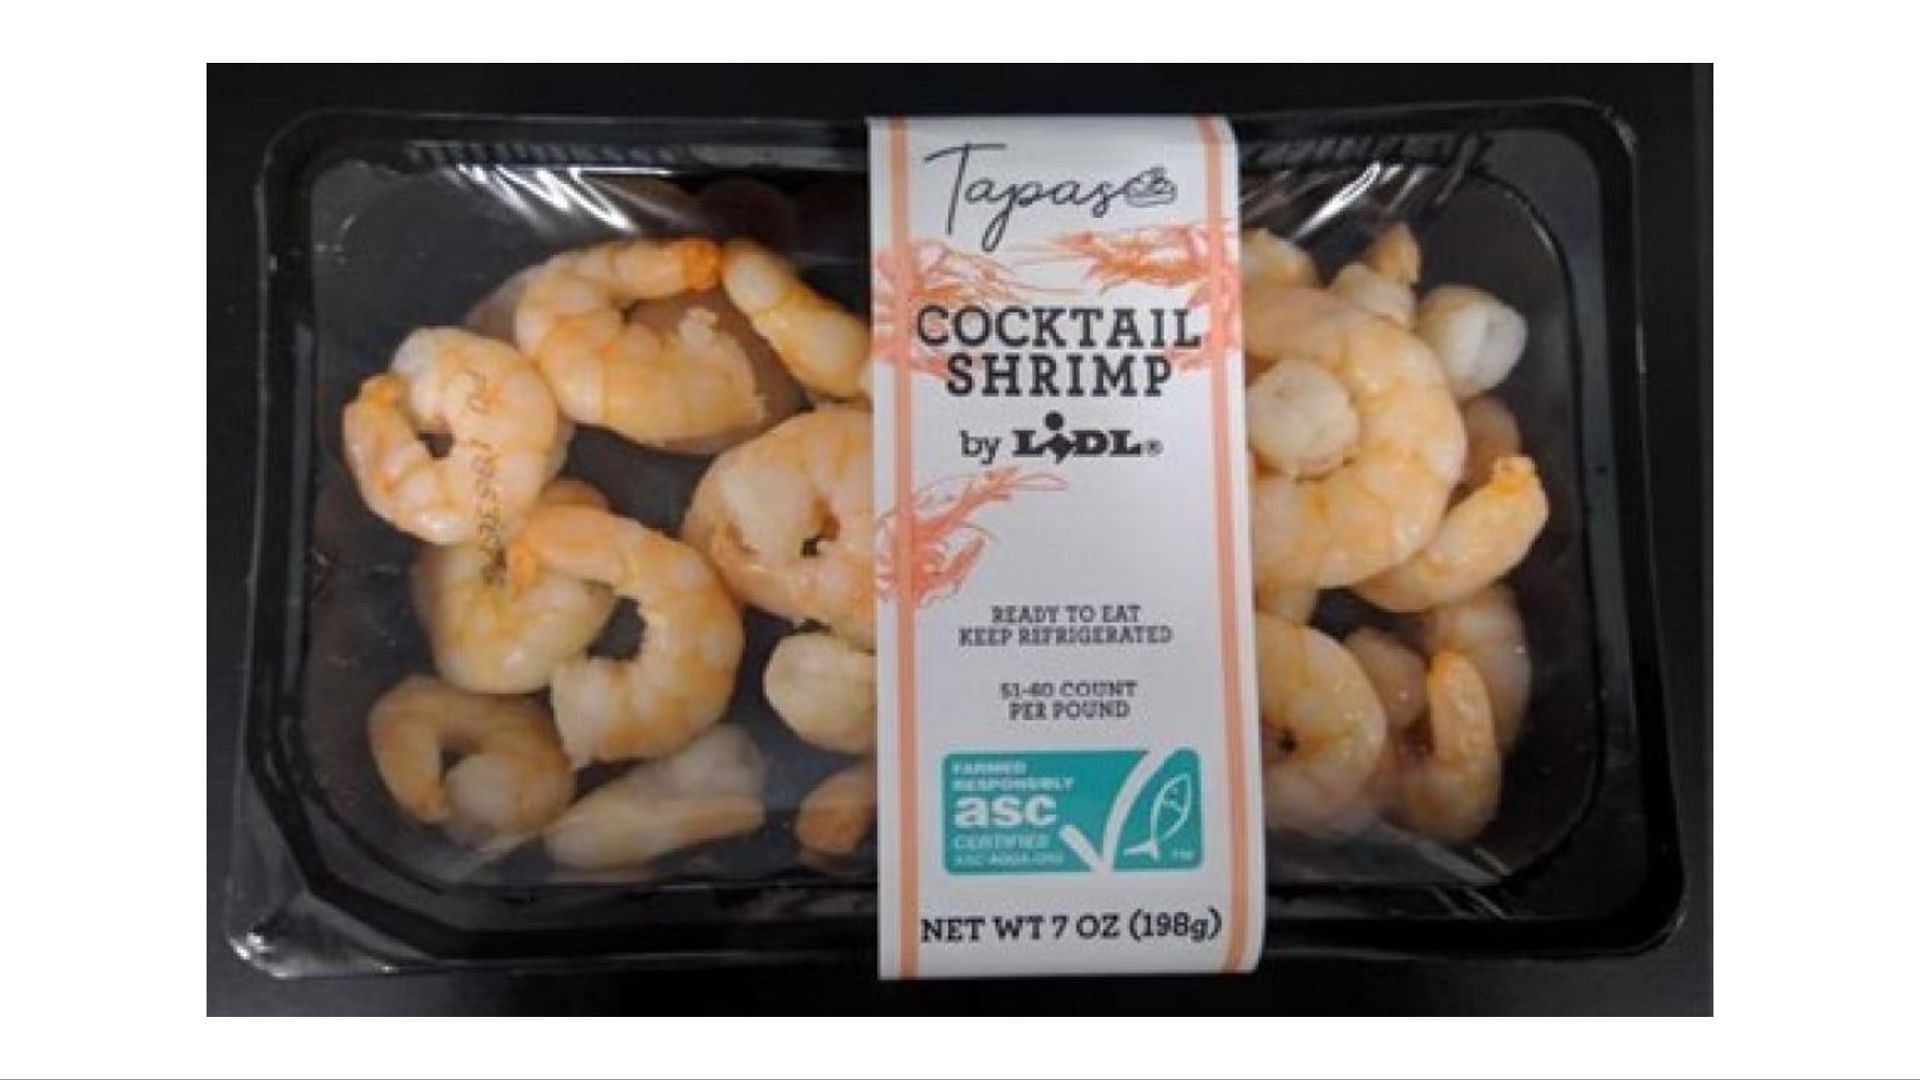 A pack of the recalled 7 oz. Tapas branded Cocktail Shrimp that was sold at Lidl stores in Delaware, District of Columbia, Georgia, Maryland, New Jersey, New York, North Carolina, Pennsylvania, South Carolina, and Virginia (Image via FDA)